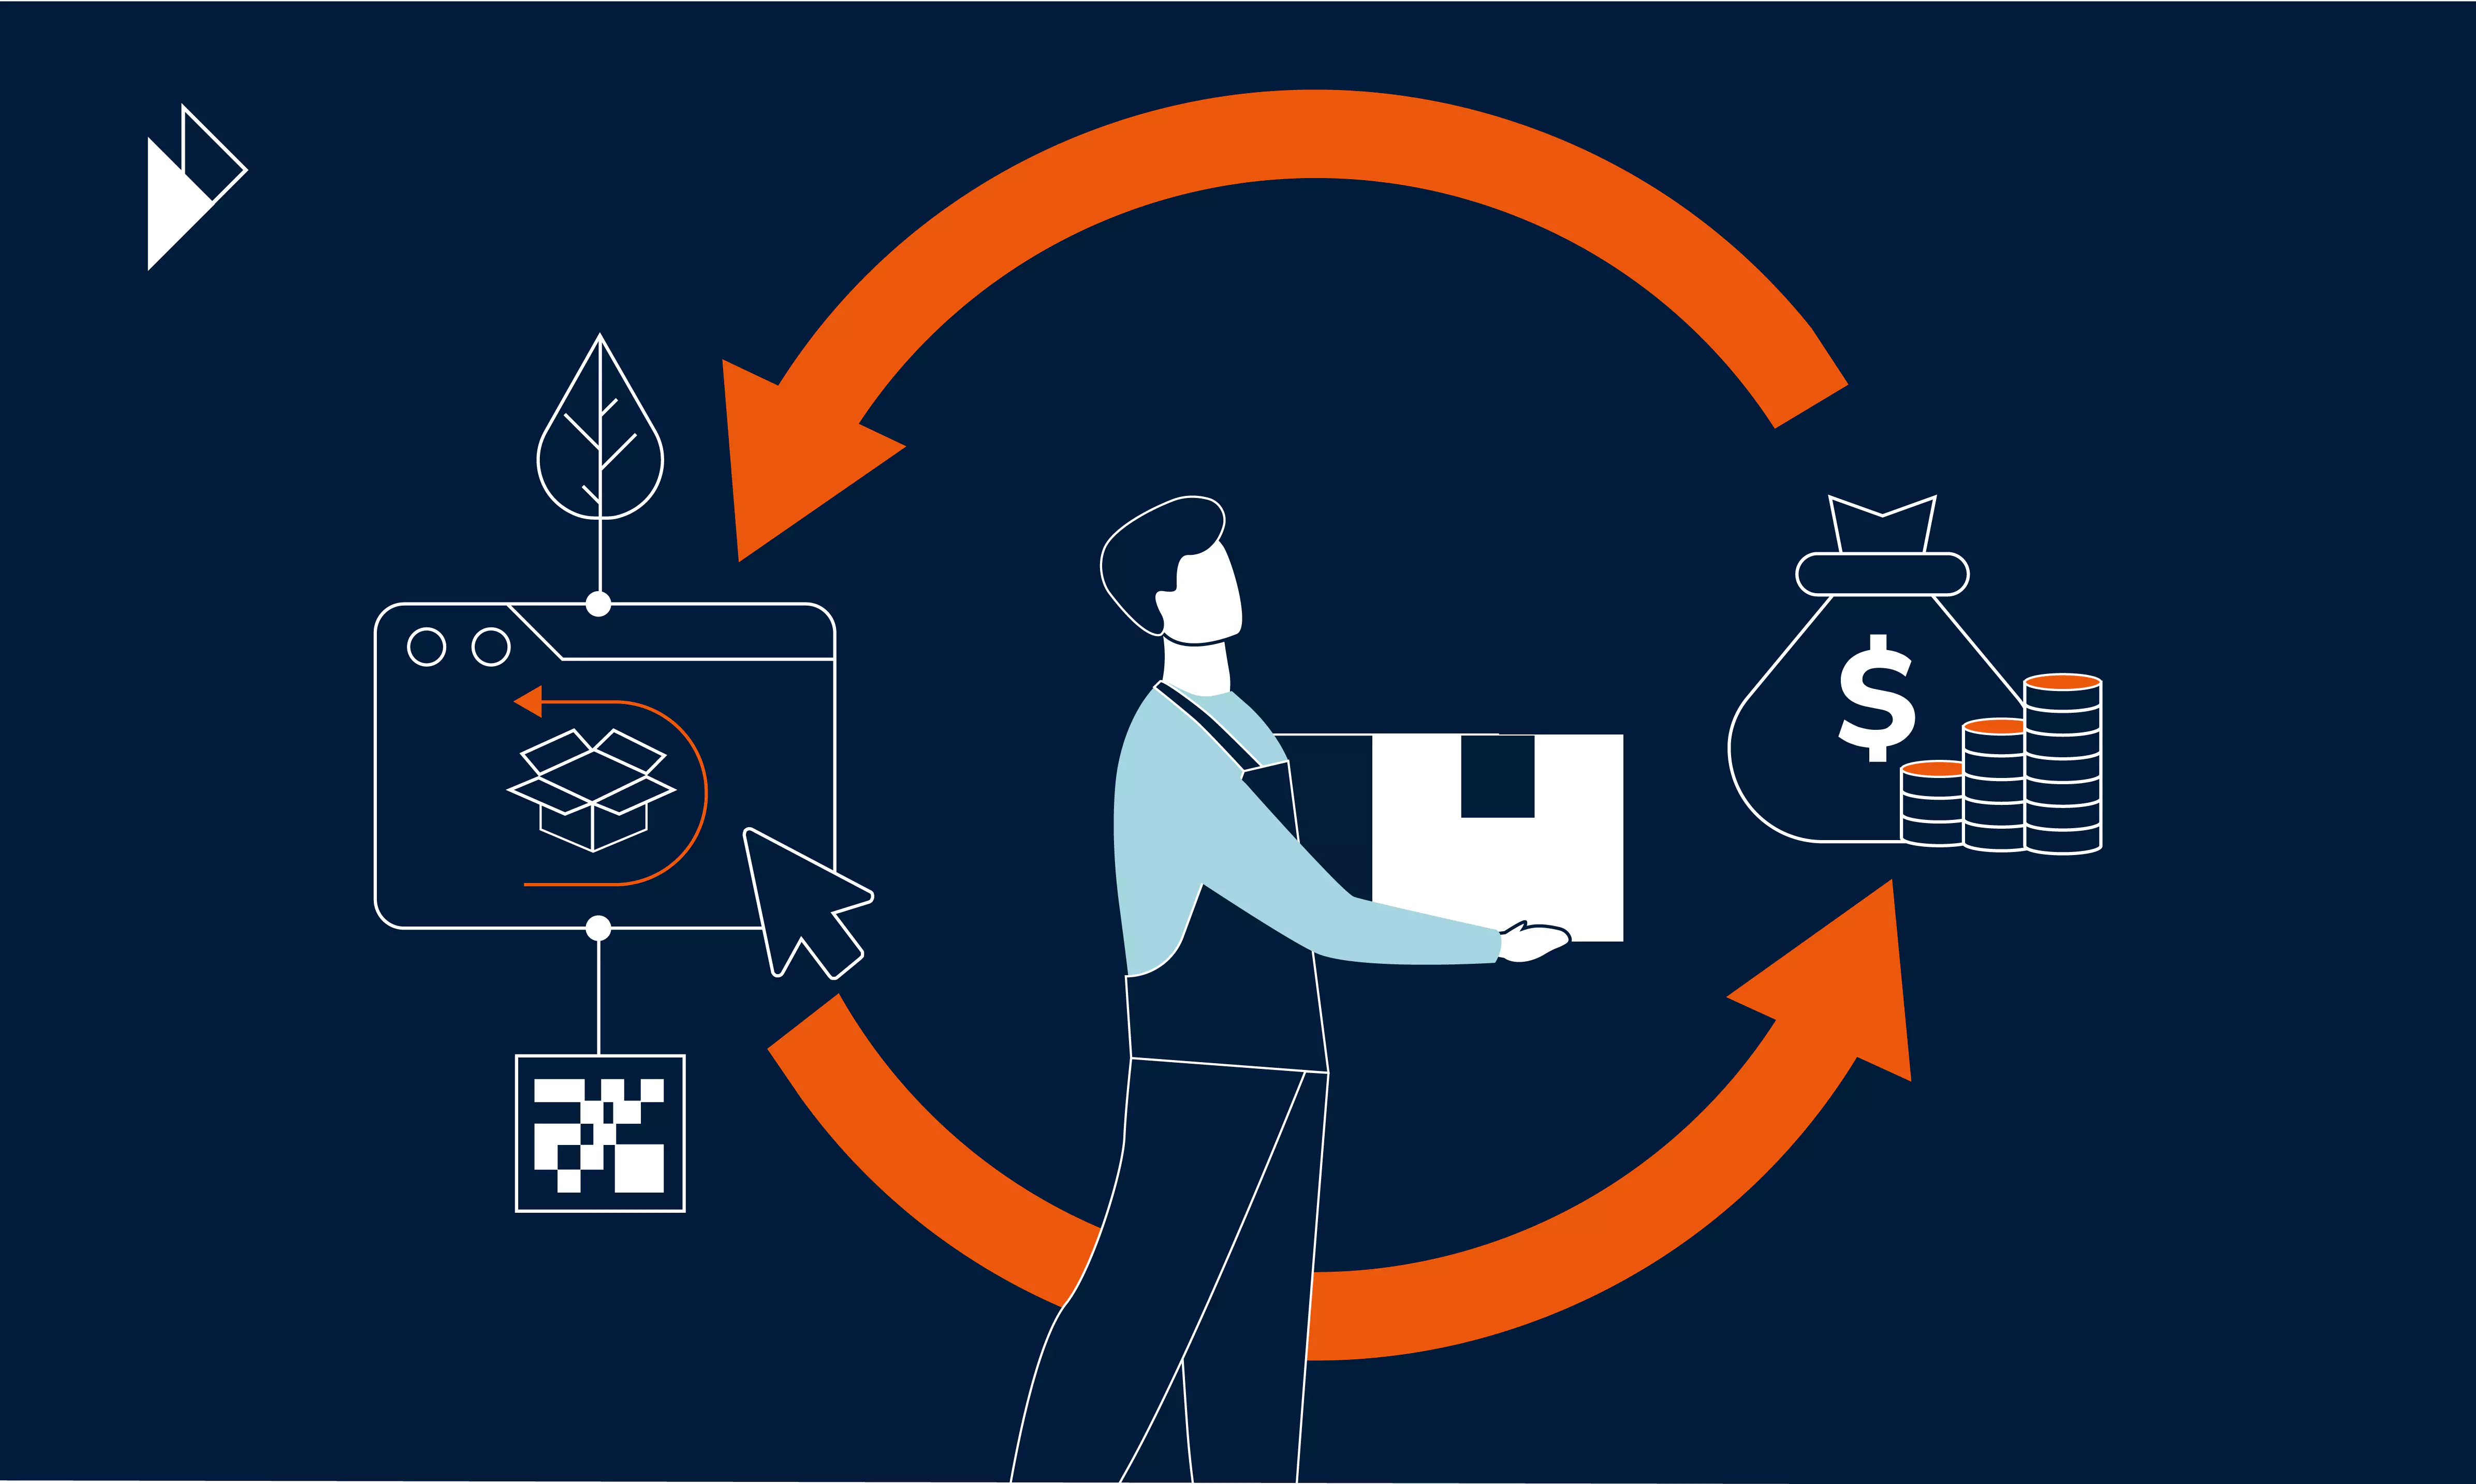 Abstract graphic depicting human with a box. Topic is on how sustainability and cost savings can come together in Parcel Perform's RETURNS module. Returns module is integrated into the Parcel Perform data and delivery experience platform. 